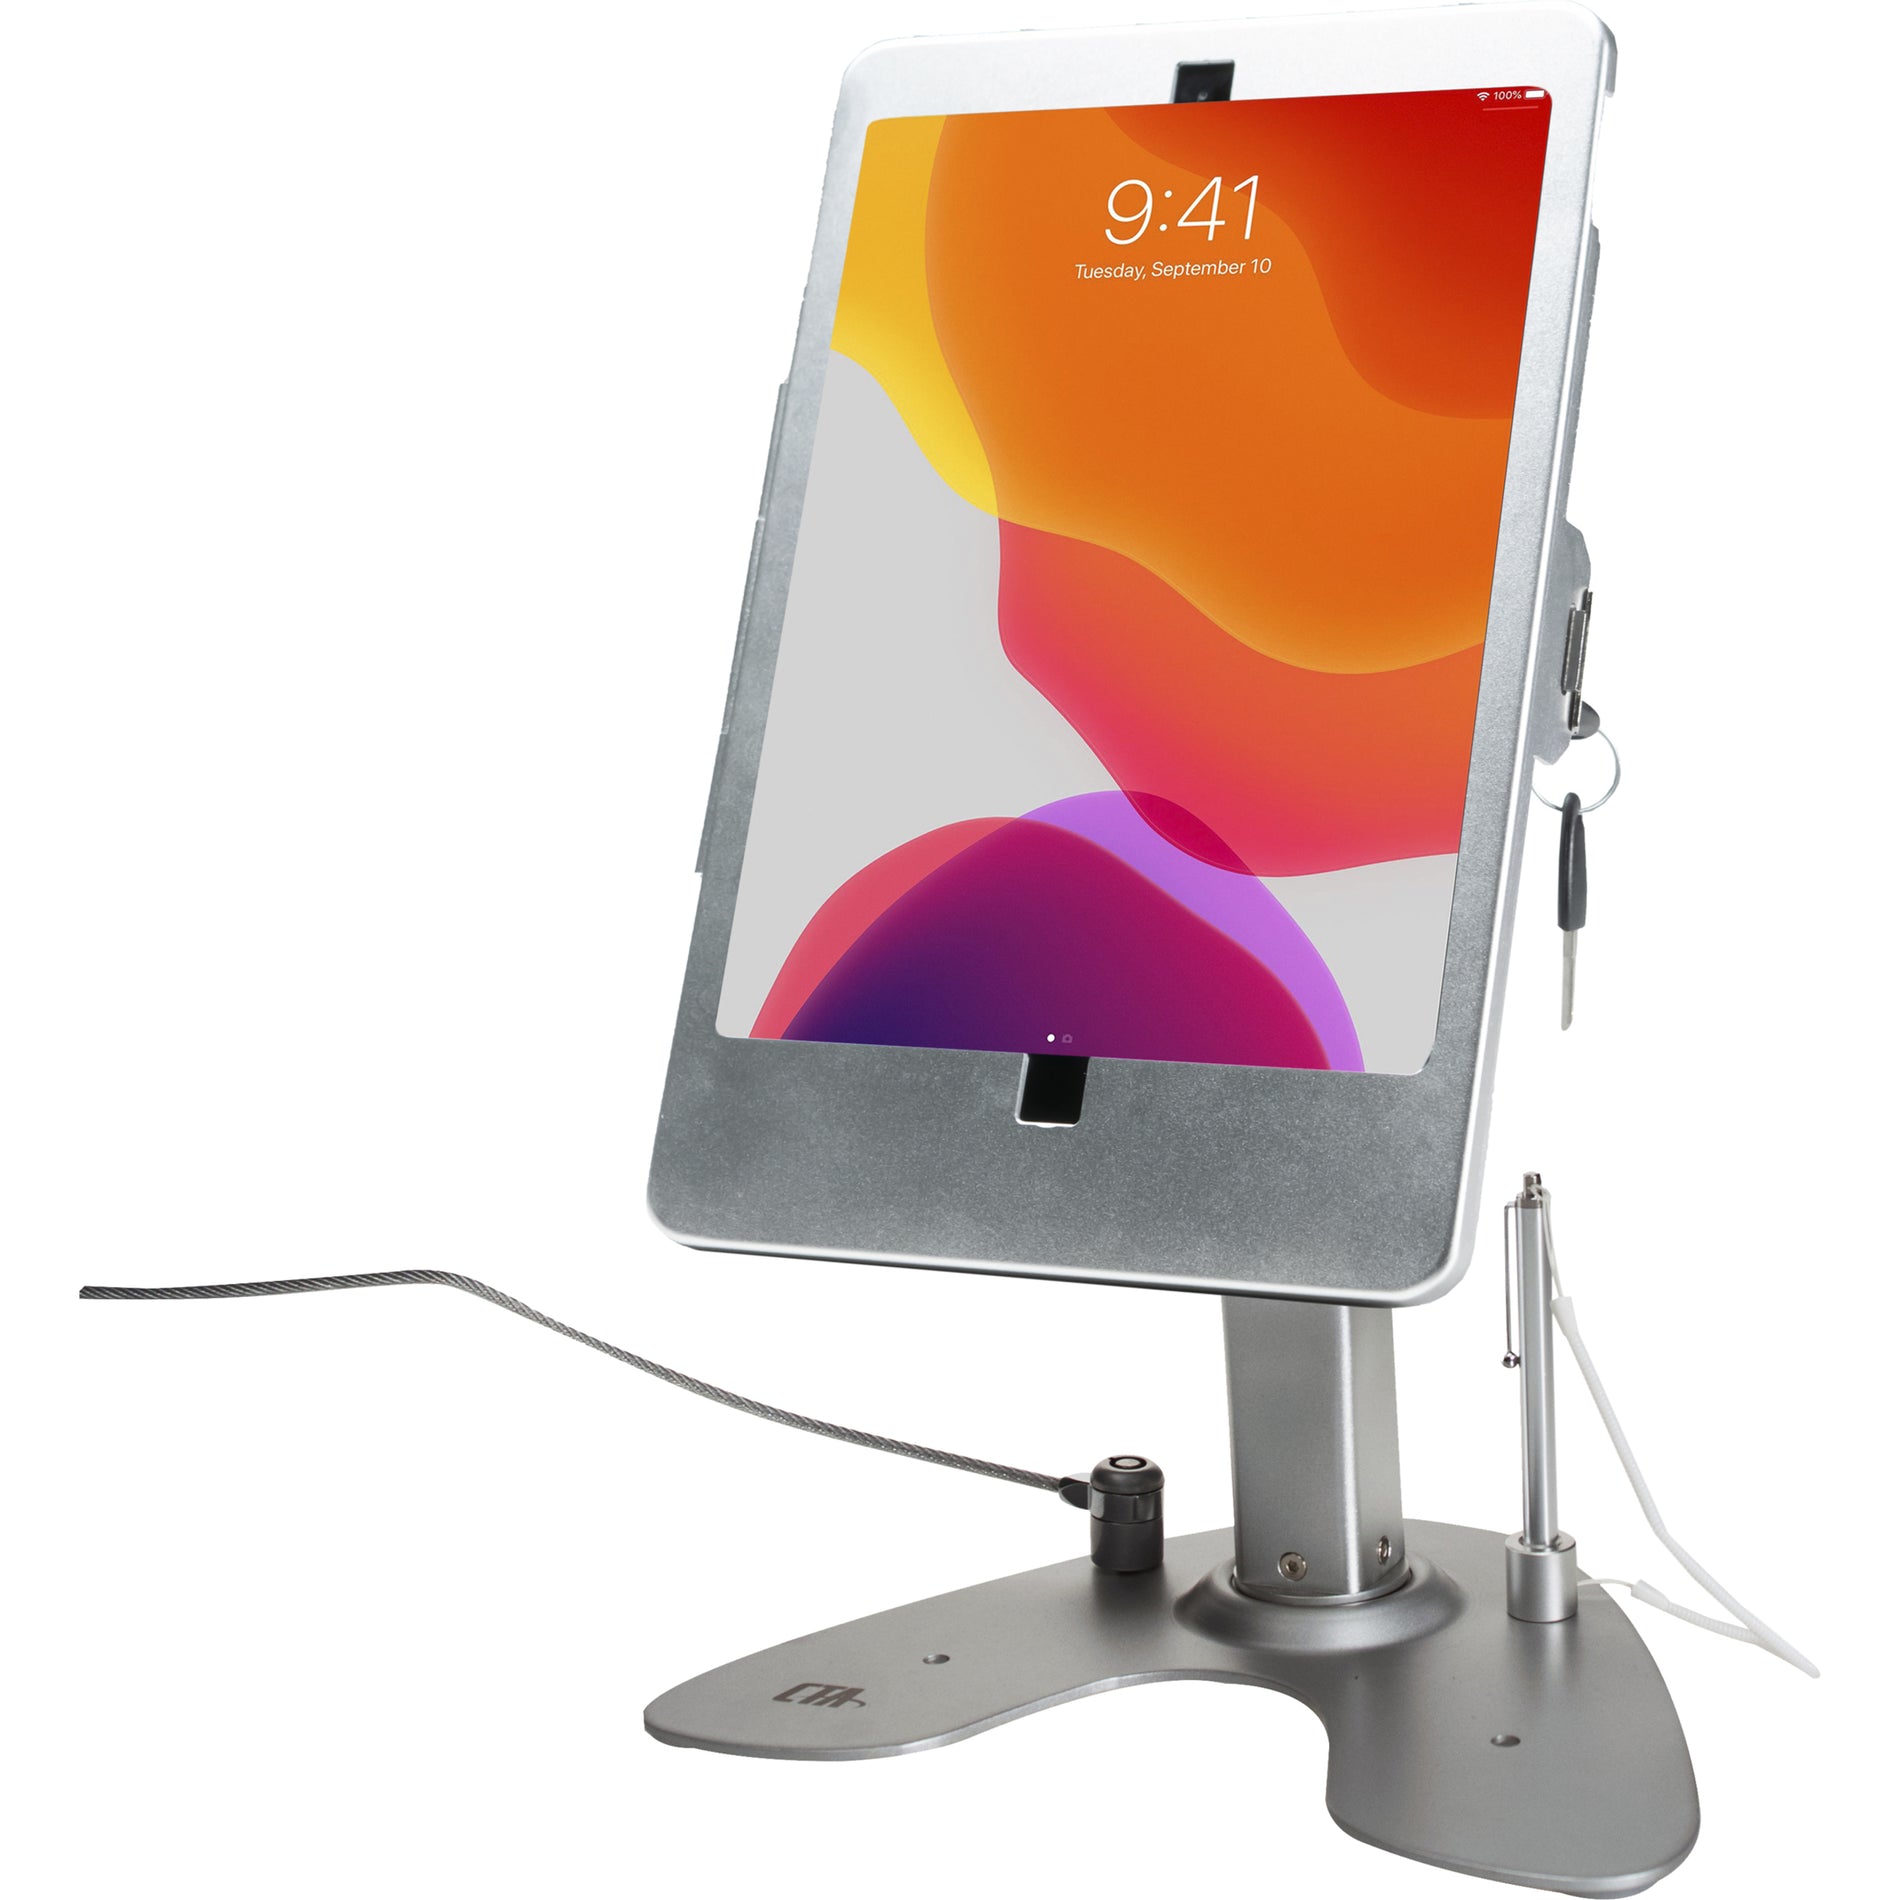 CTA Digital PAD-ASK10 Dual Security Kiosk Stand with Locking Case and Cable for iPad 10.2-Inch, Desk Mount